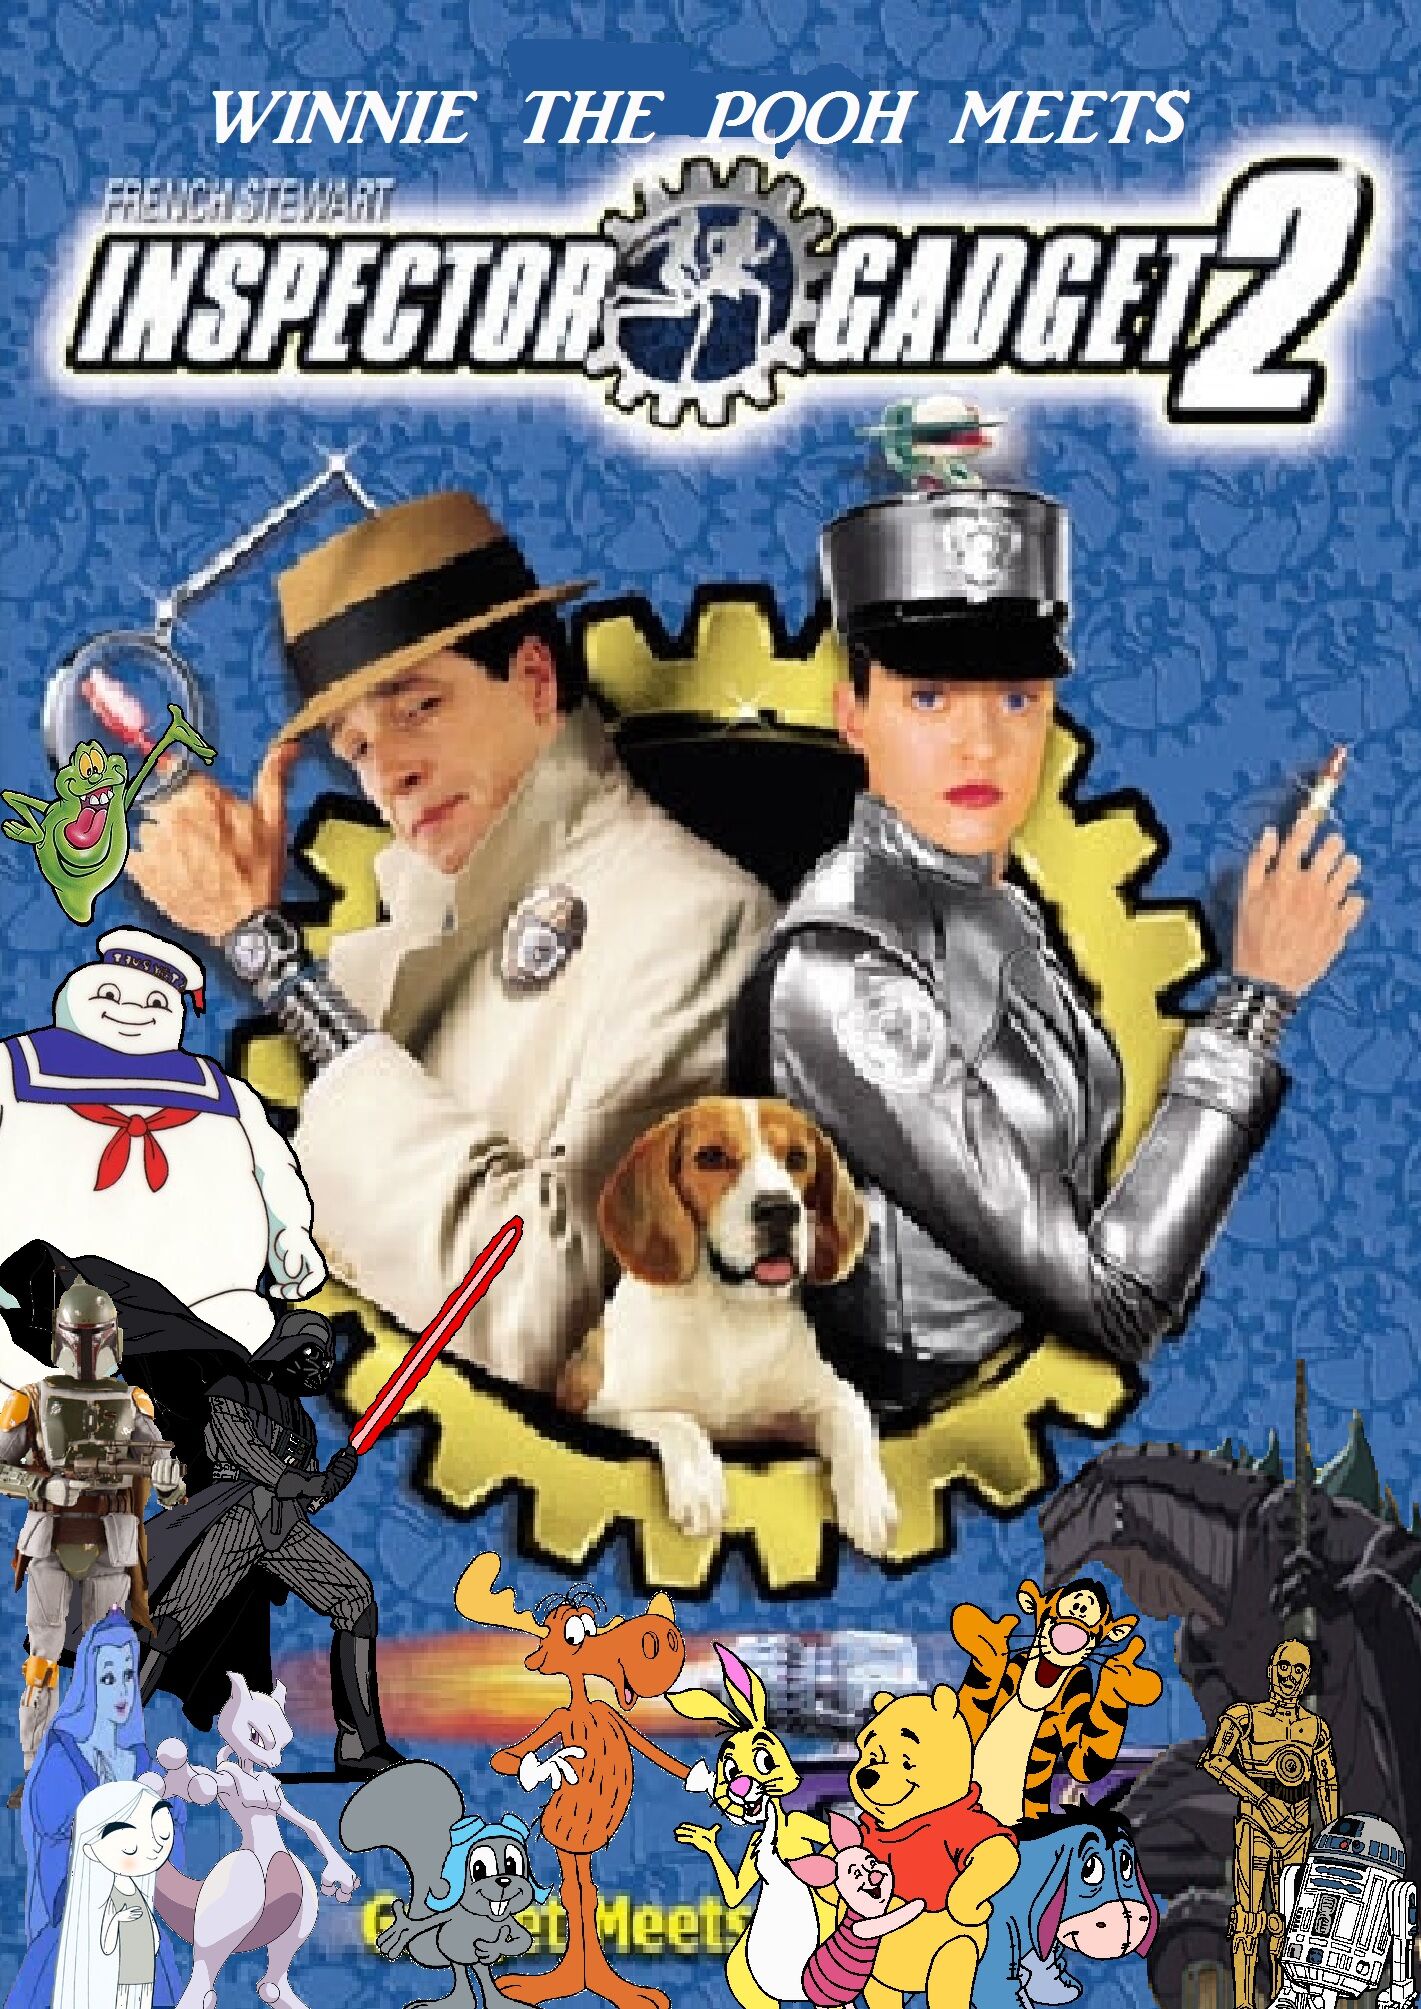 https://static.wikia.nocookie.net/kerasotes/images/3/37/Winnie_the_Pooh_Meets_Inspector_Gadget_2_poster.jpg/revision/latest/scale-to-width-down/1421?cb=20130723210209